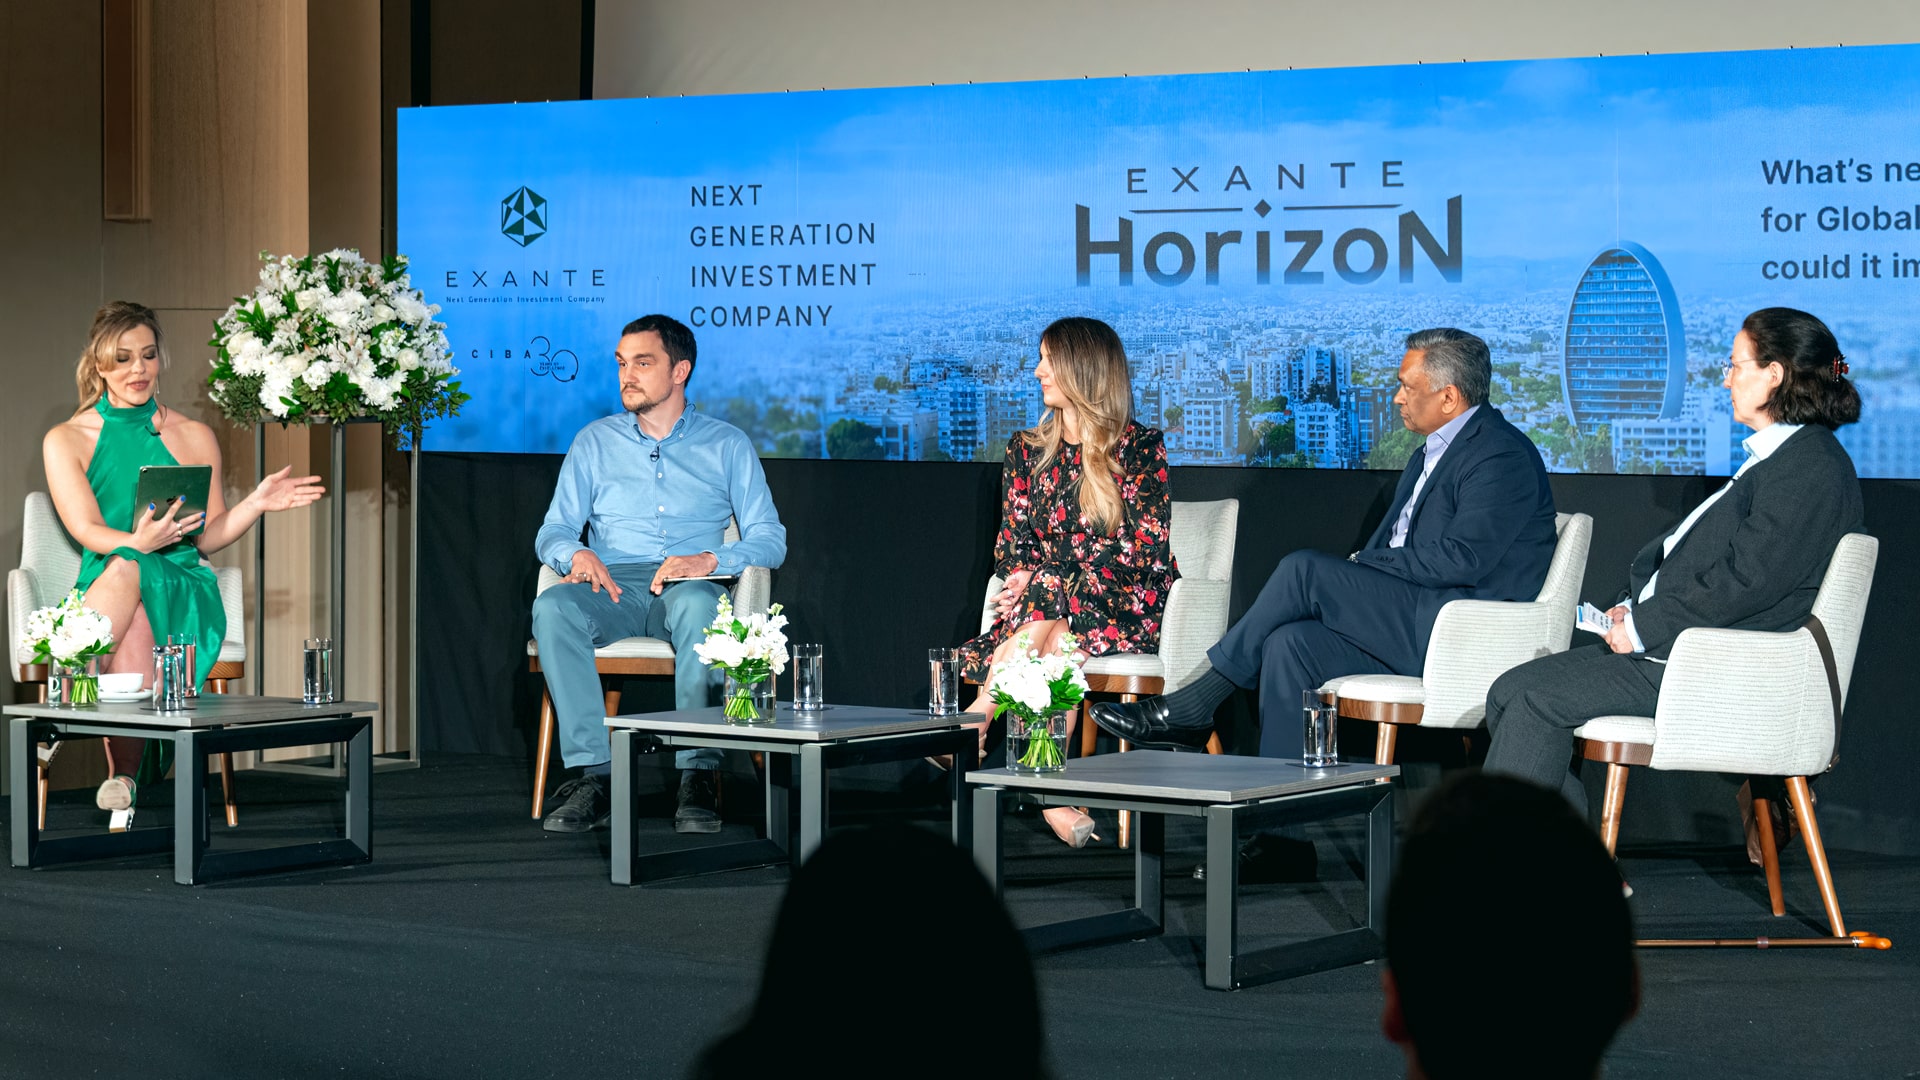 Our second EXANTE Horizon event was live from Cyprus. View the highlights here